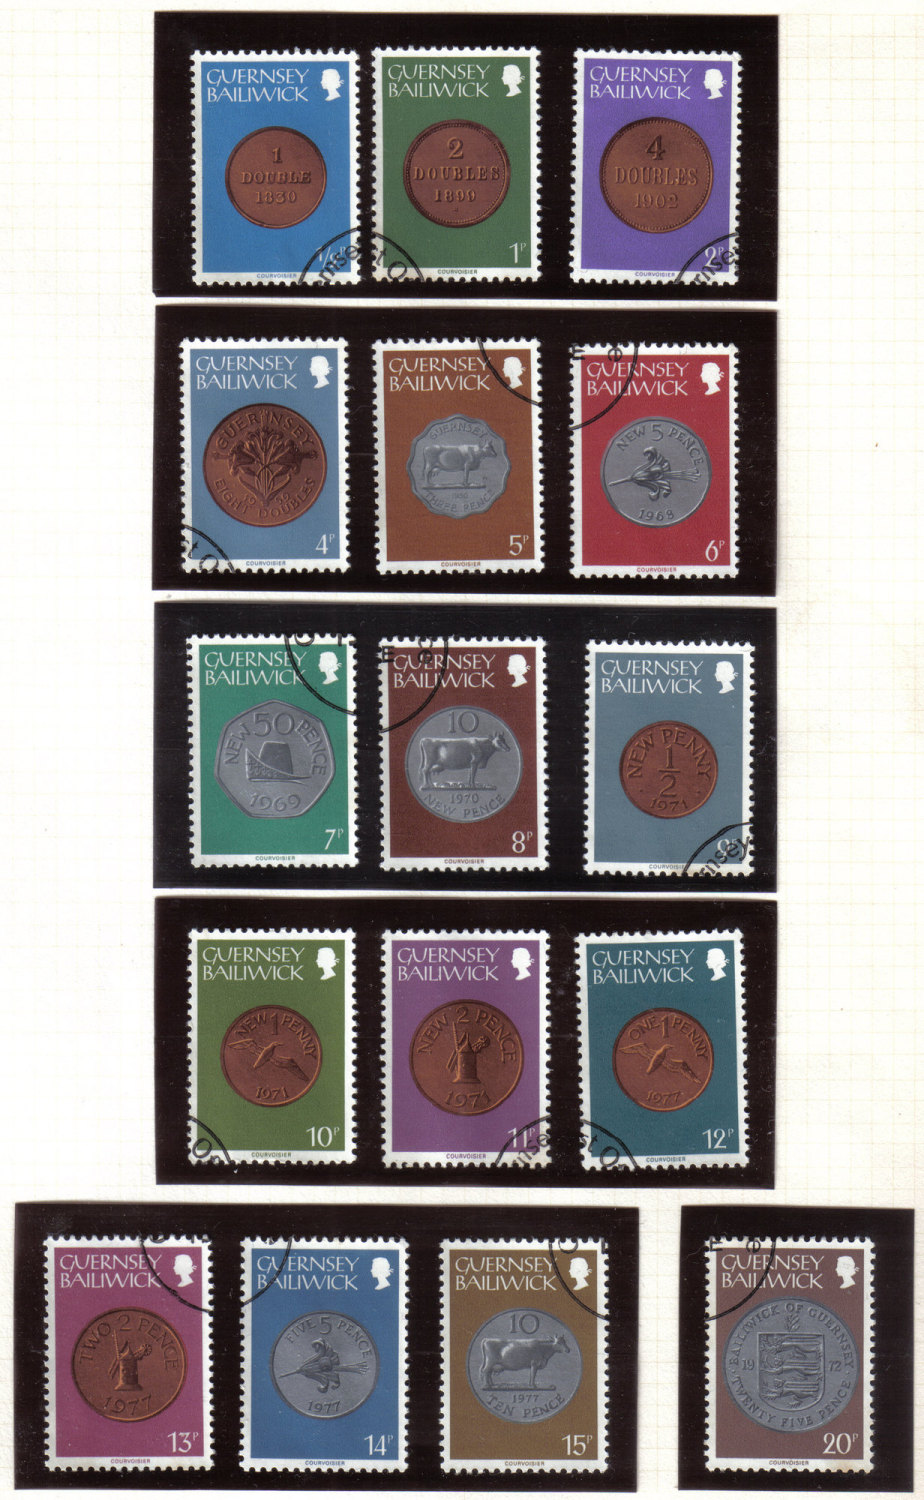 Guernsey Stamps 1979 Coins low values up to 20p - USED (z600)